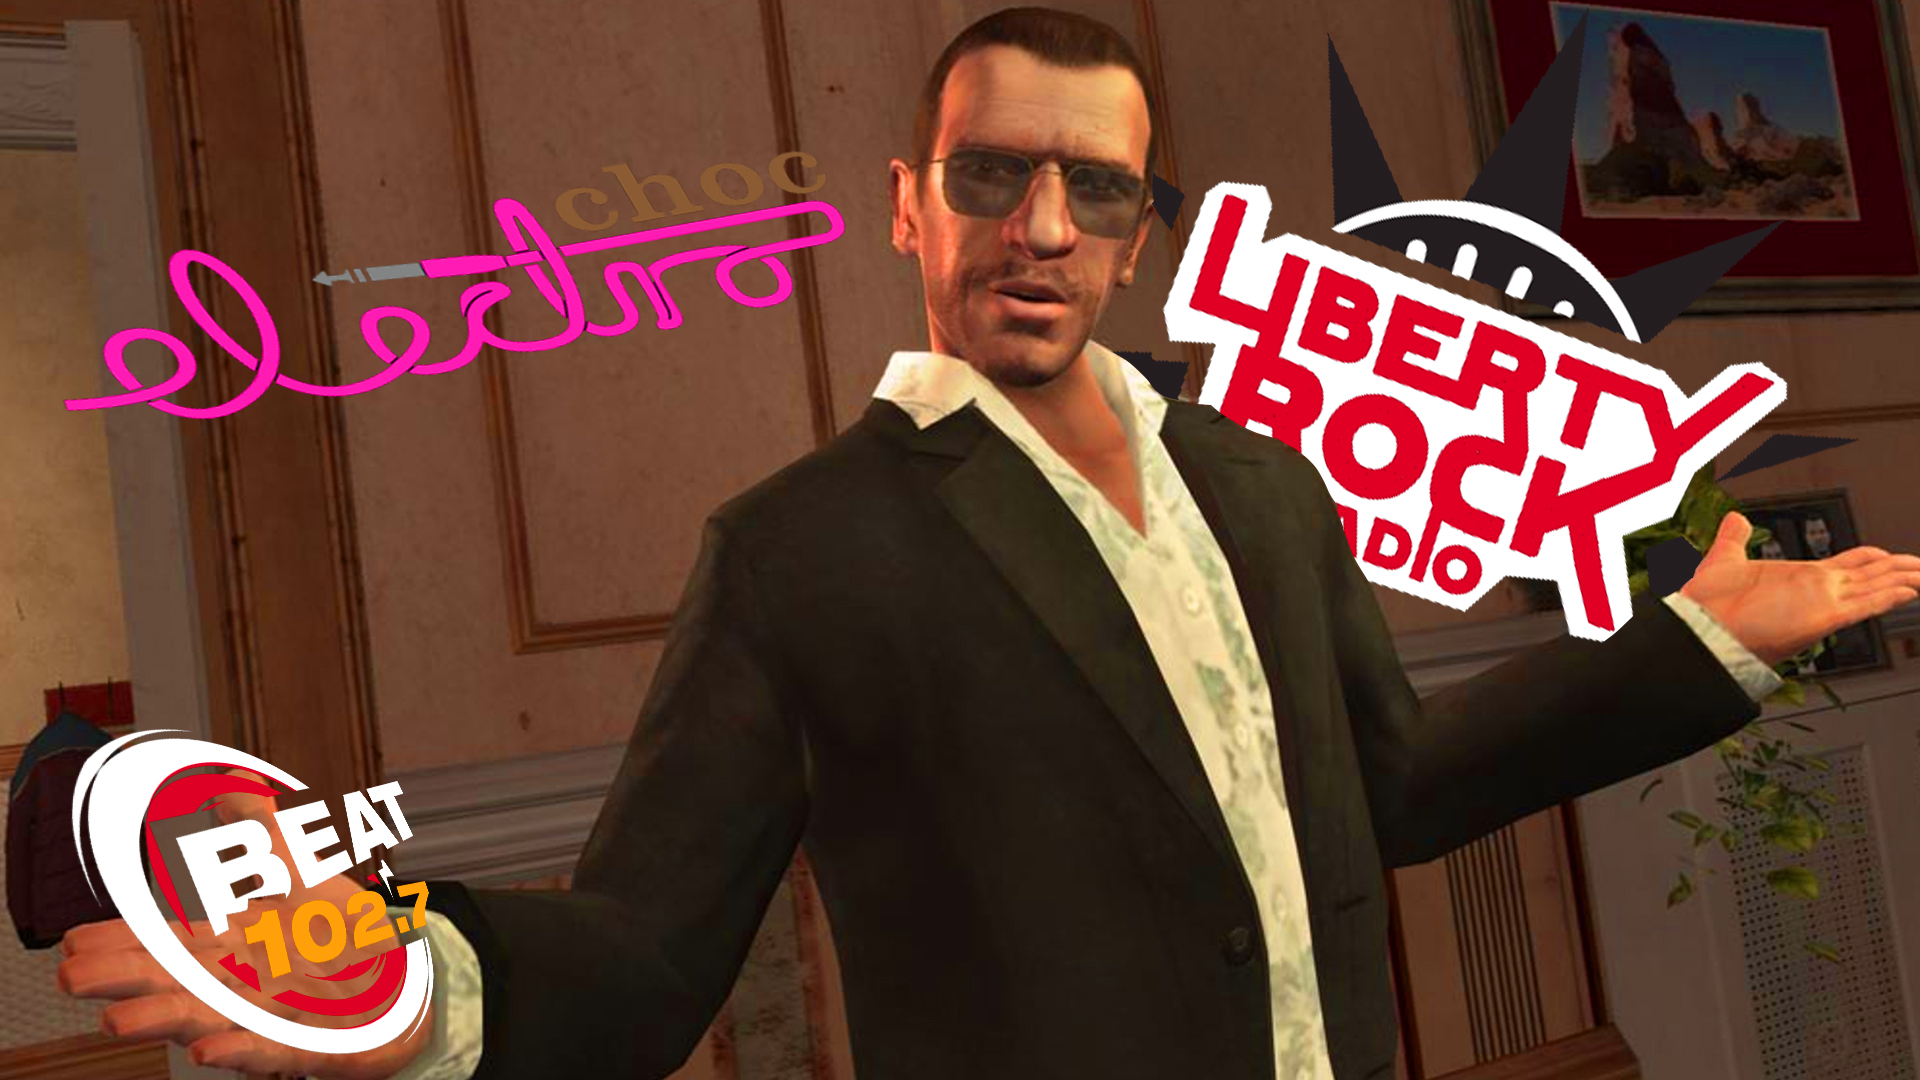 5 reasons why Niko Bellic from GTA 4 is the best protagonist of all times